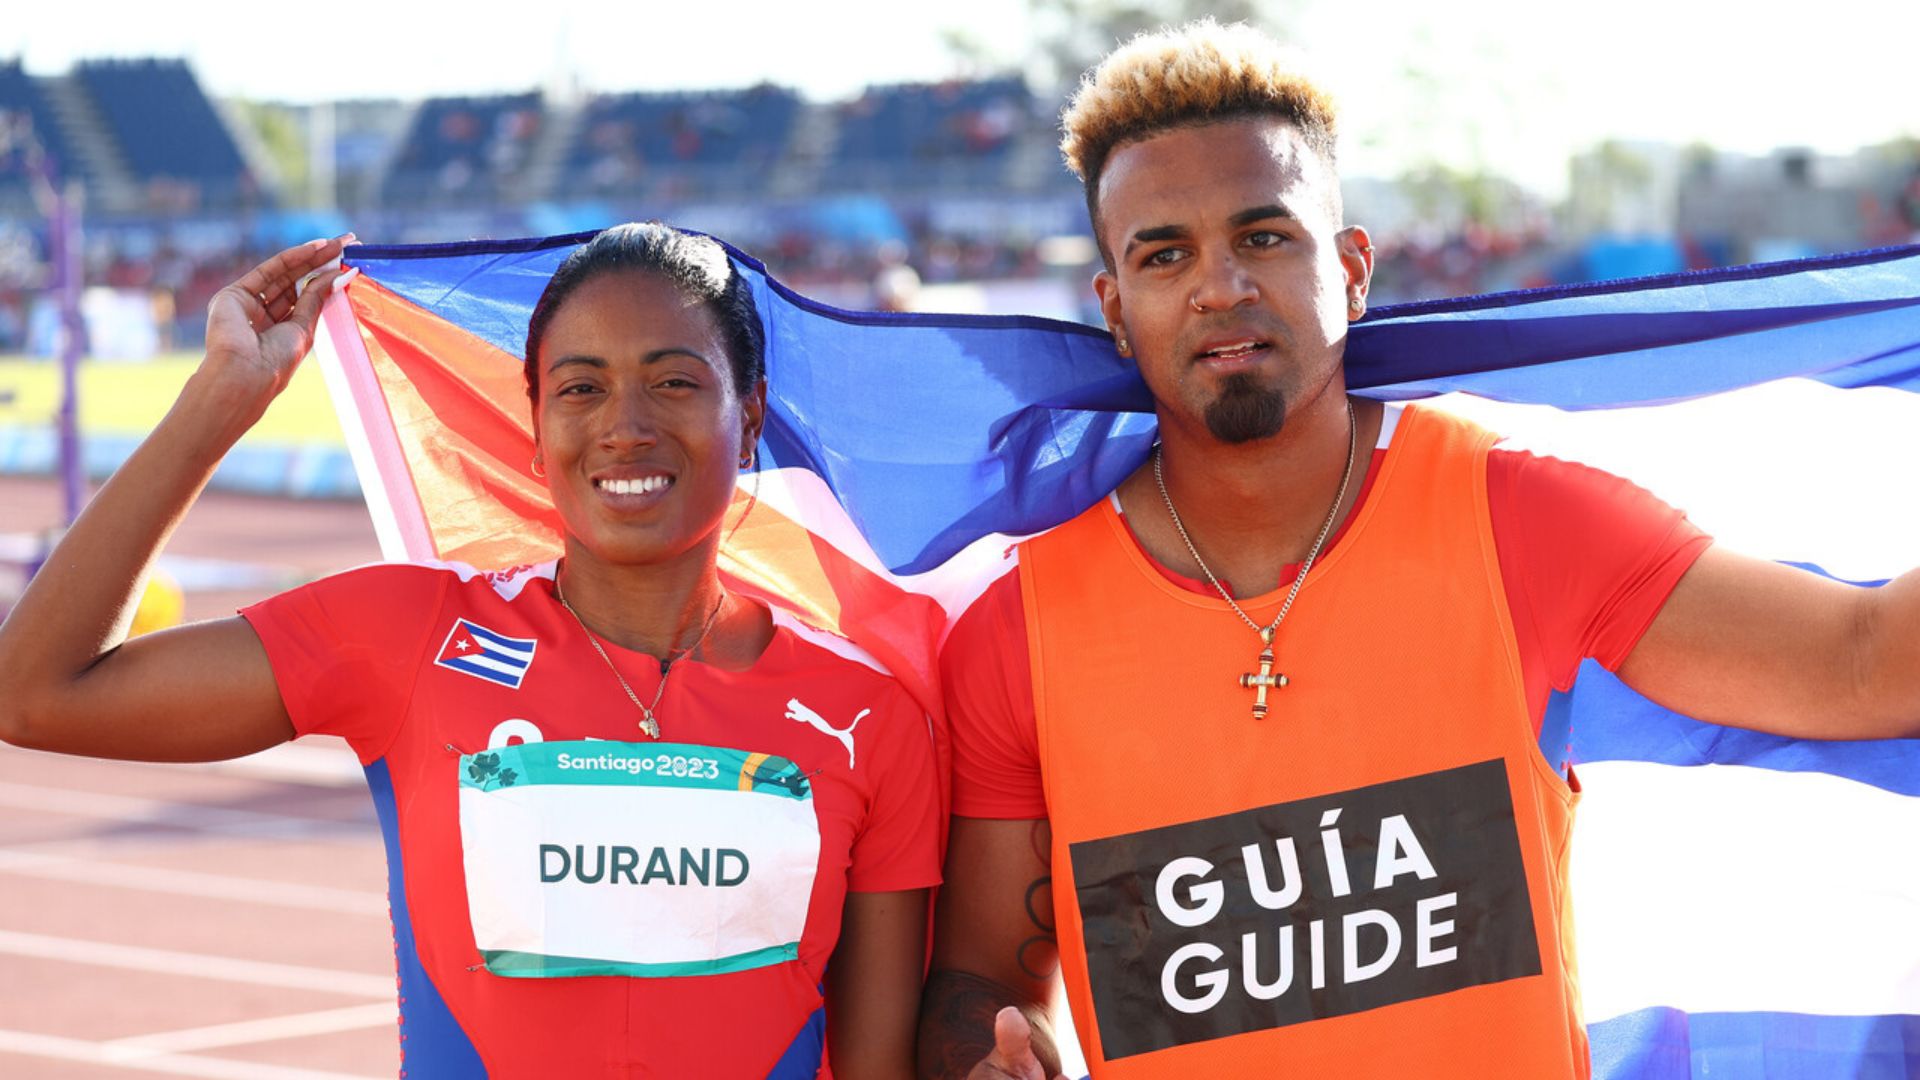 Champions Repeat in Conclusion of Track Events at Santiago 2023